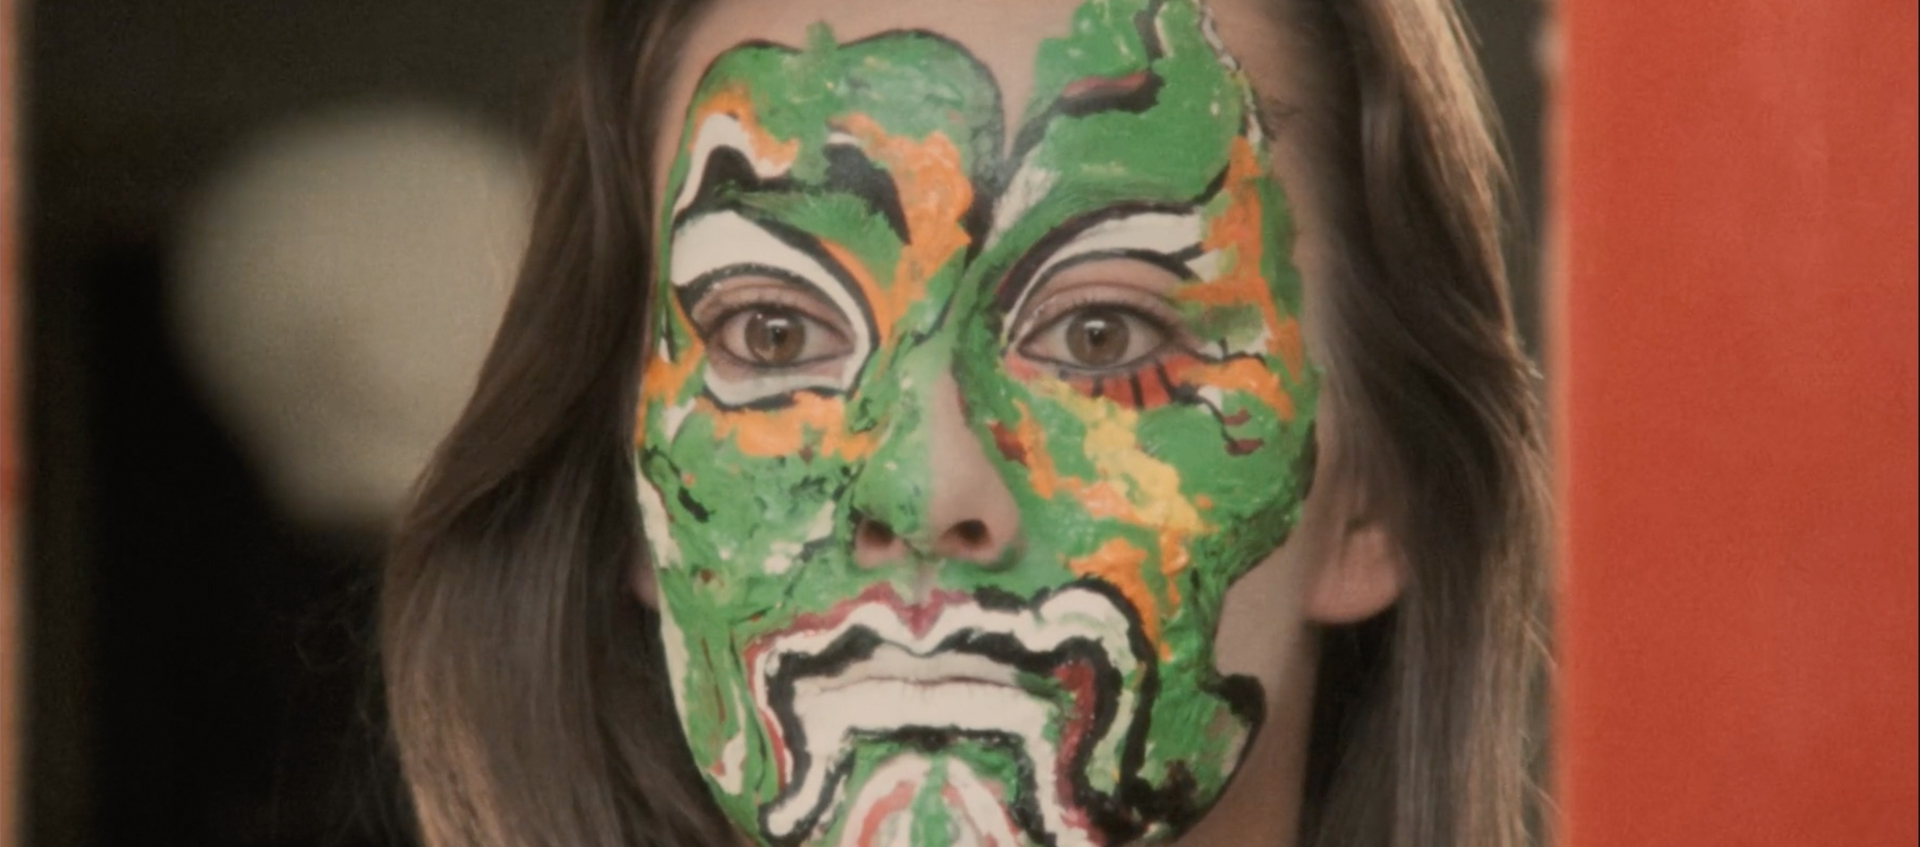 A close-up still of a woman with her face painted, in a pattern of green, orange, white, black, red, and yellow, to look like an ornate mask.